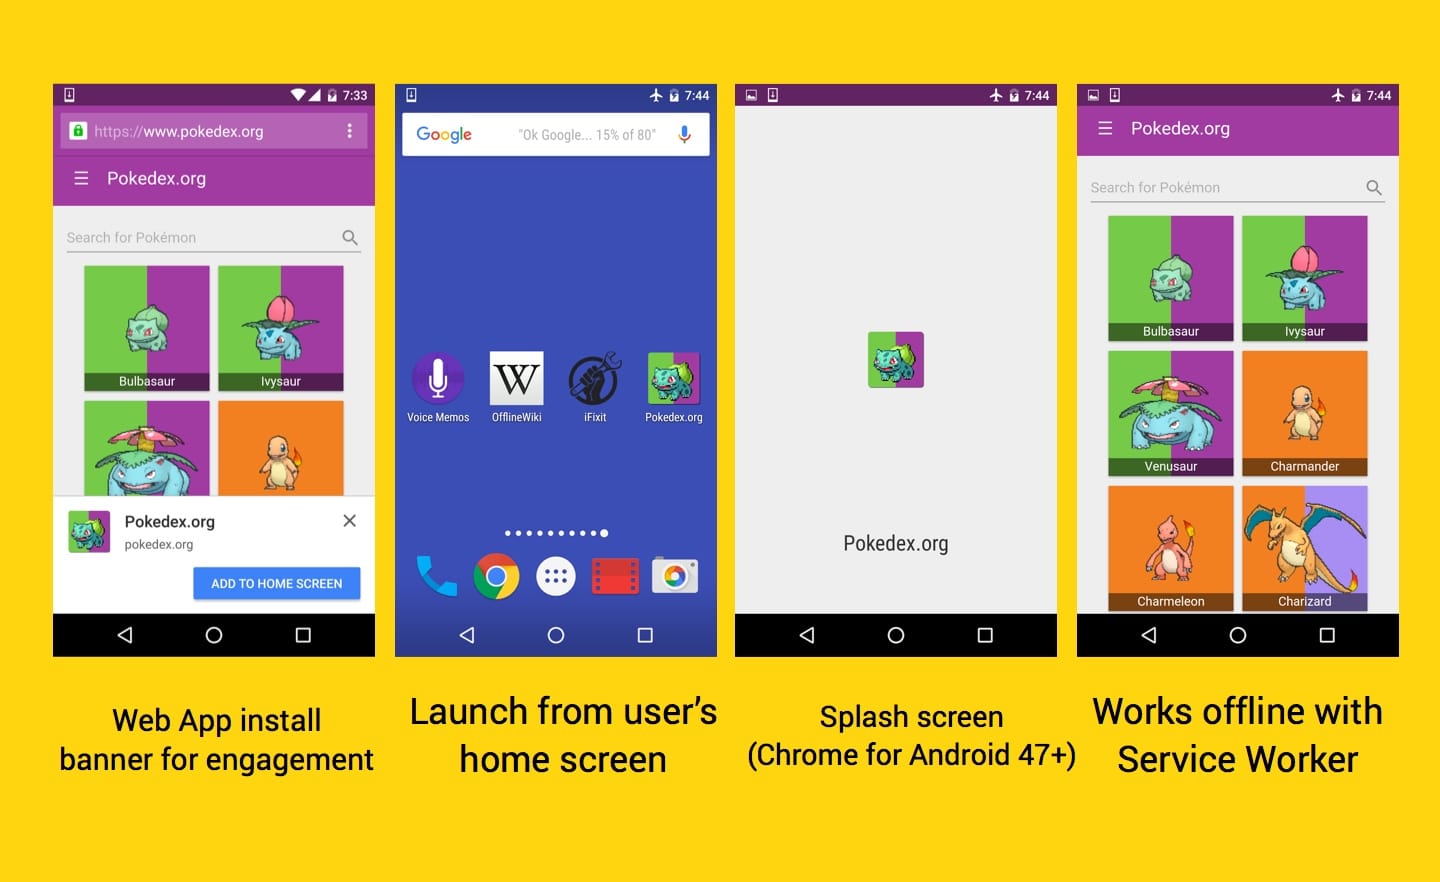 Web app install banners for engagement, launch from the user's home screen, splash screen in Chrome for Android, works offline with service worker